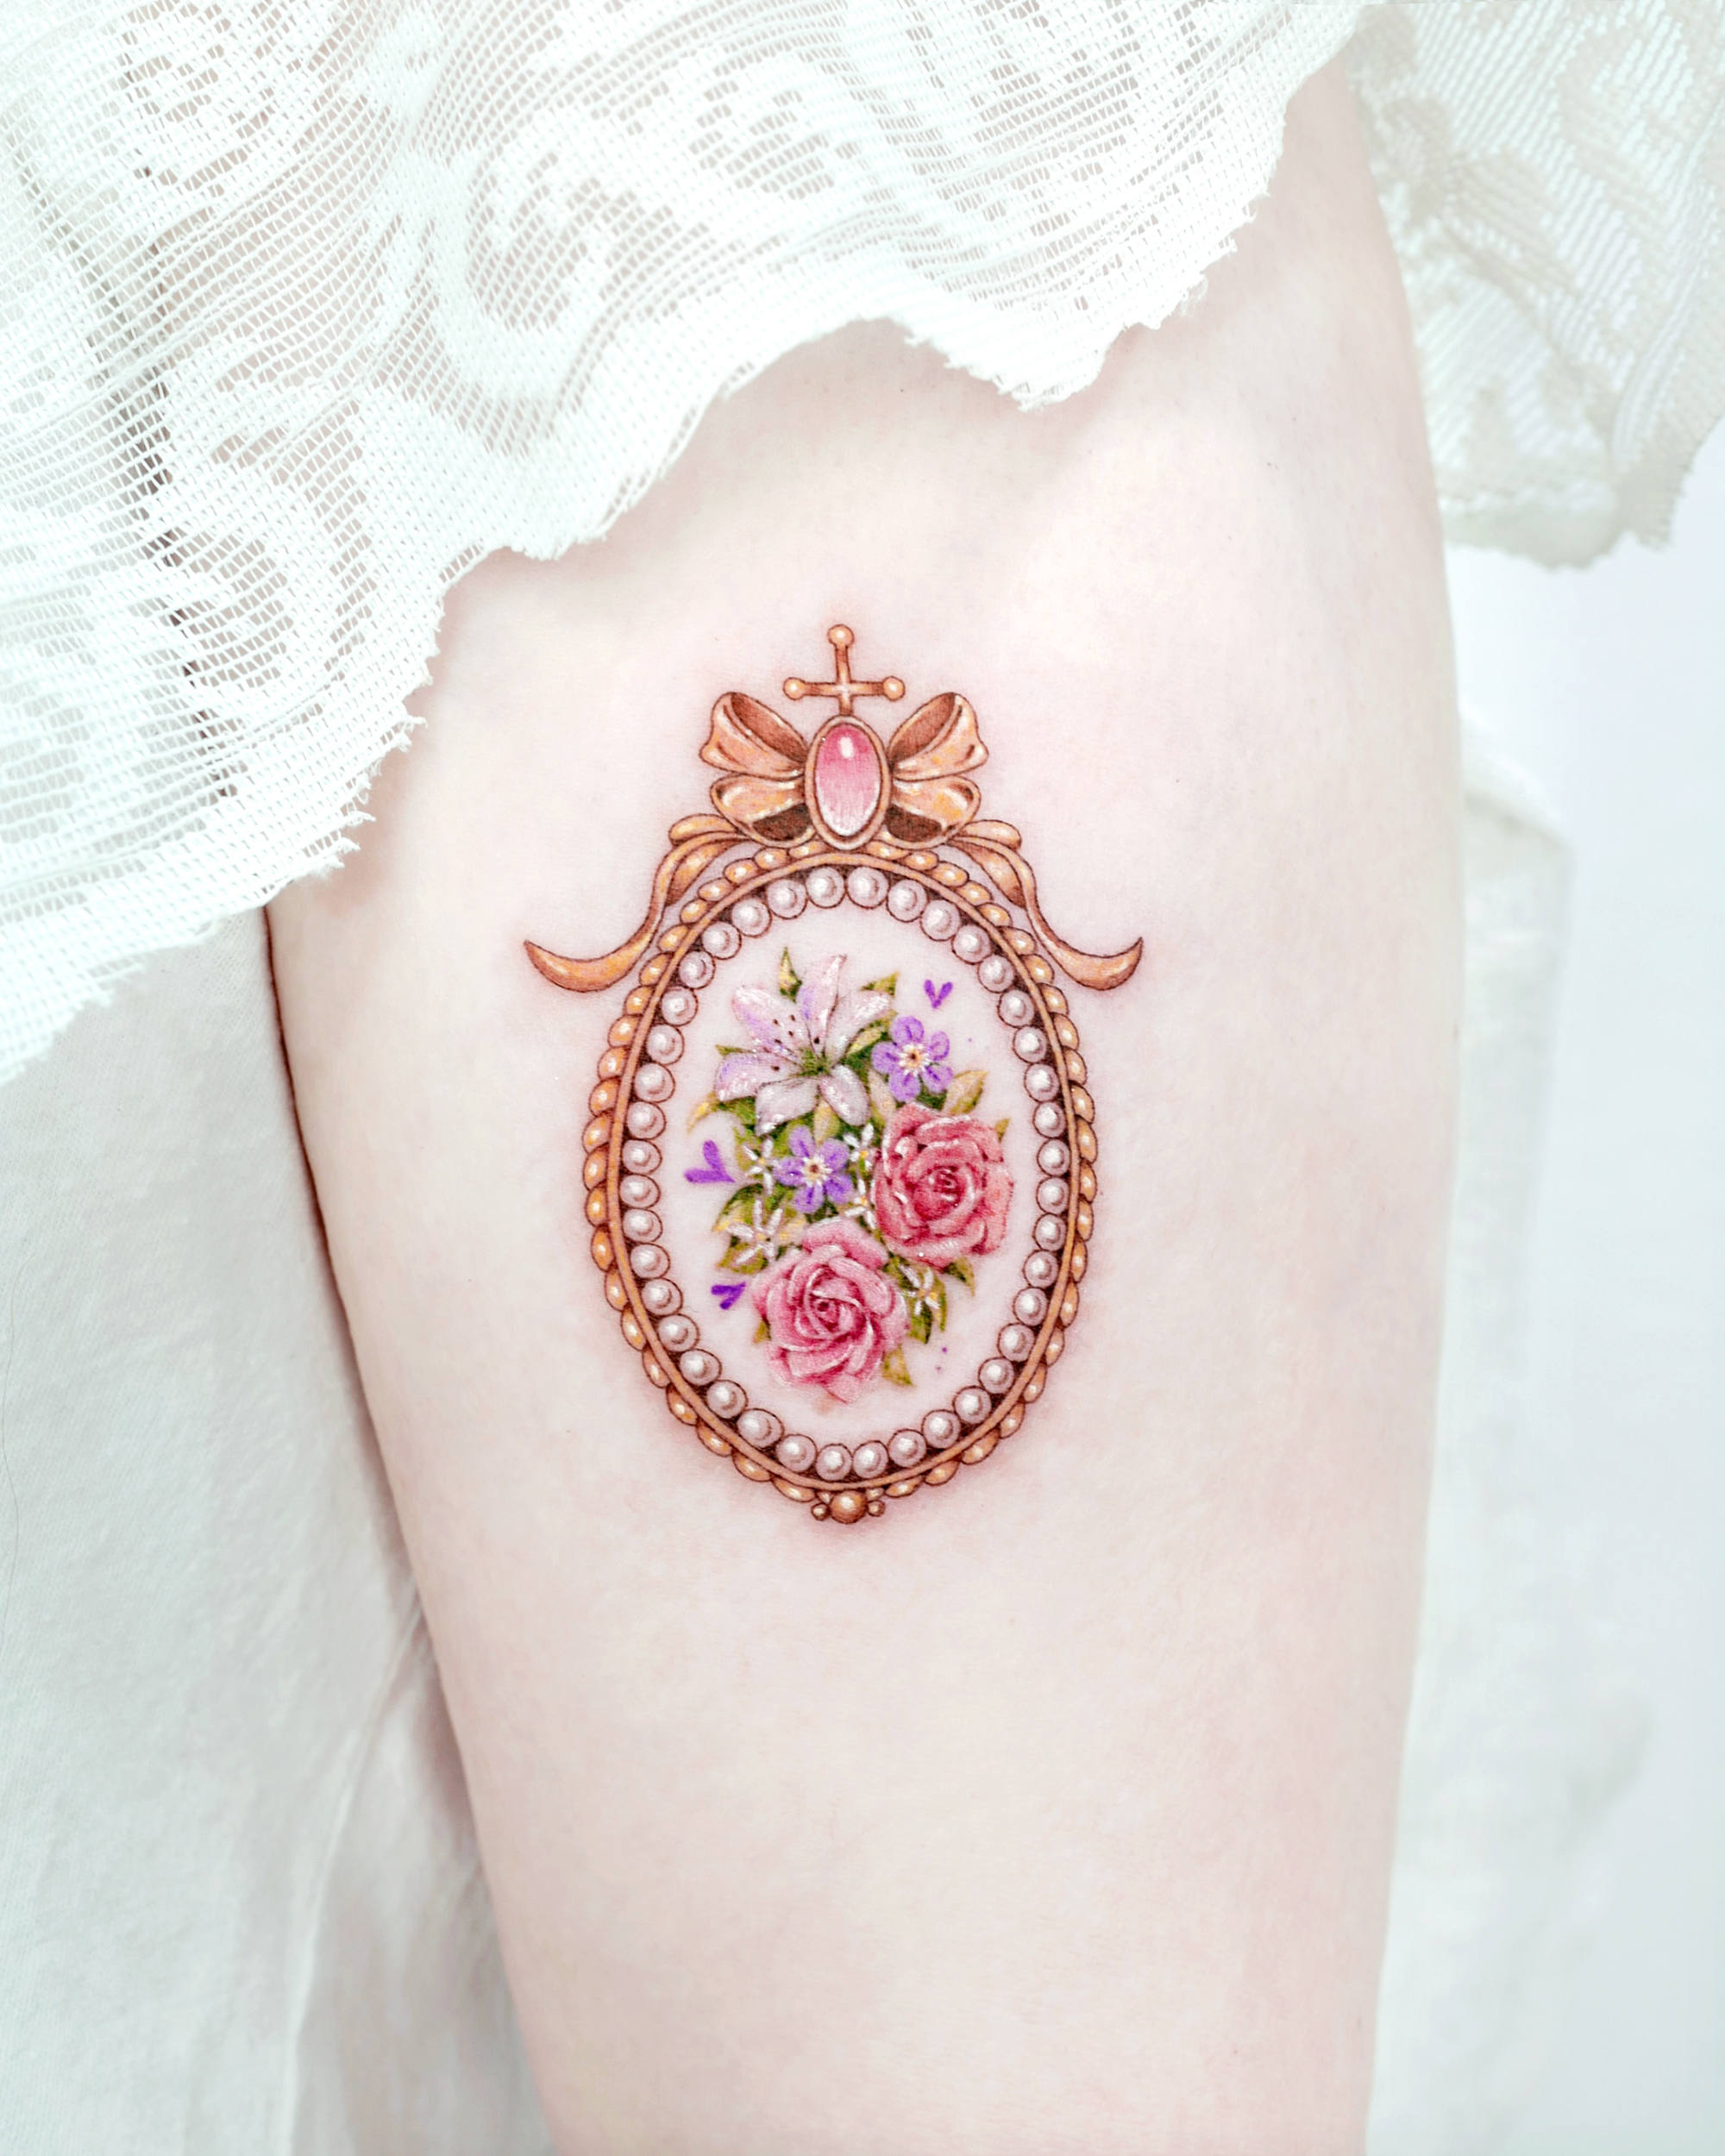 A recreation of a vintage ceramic brooch. Tattoo by Solar
